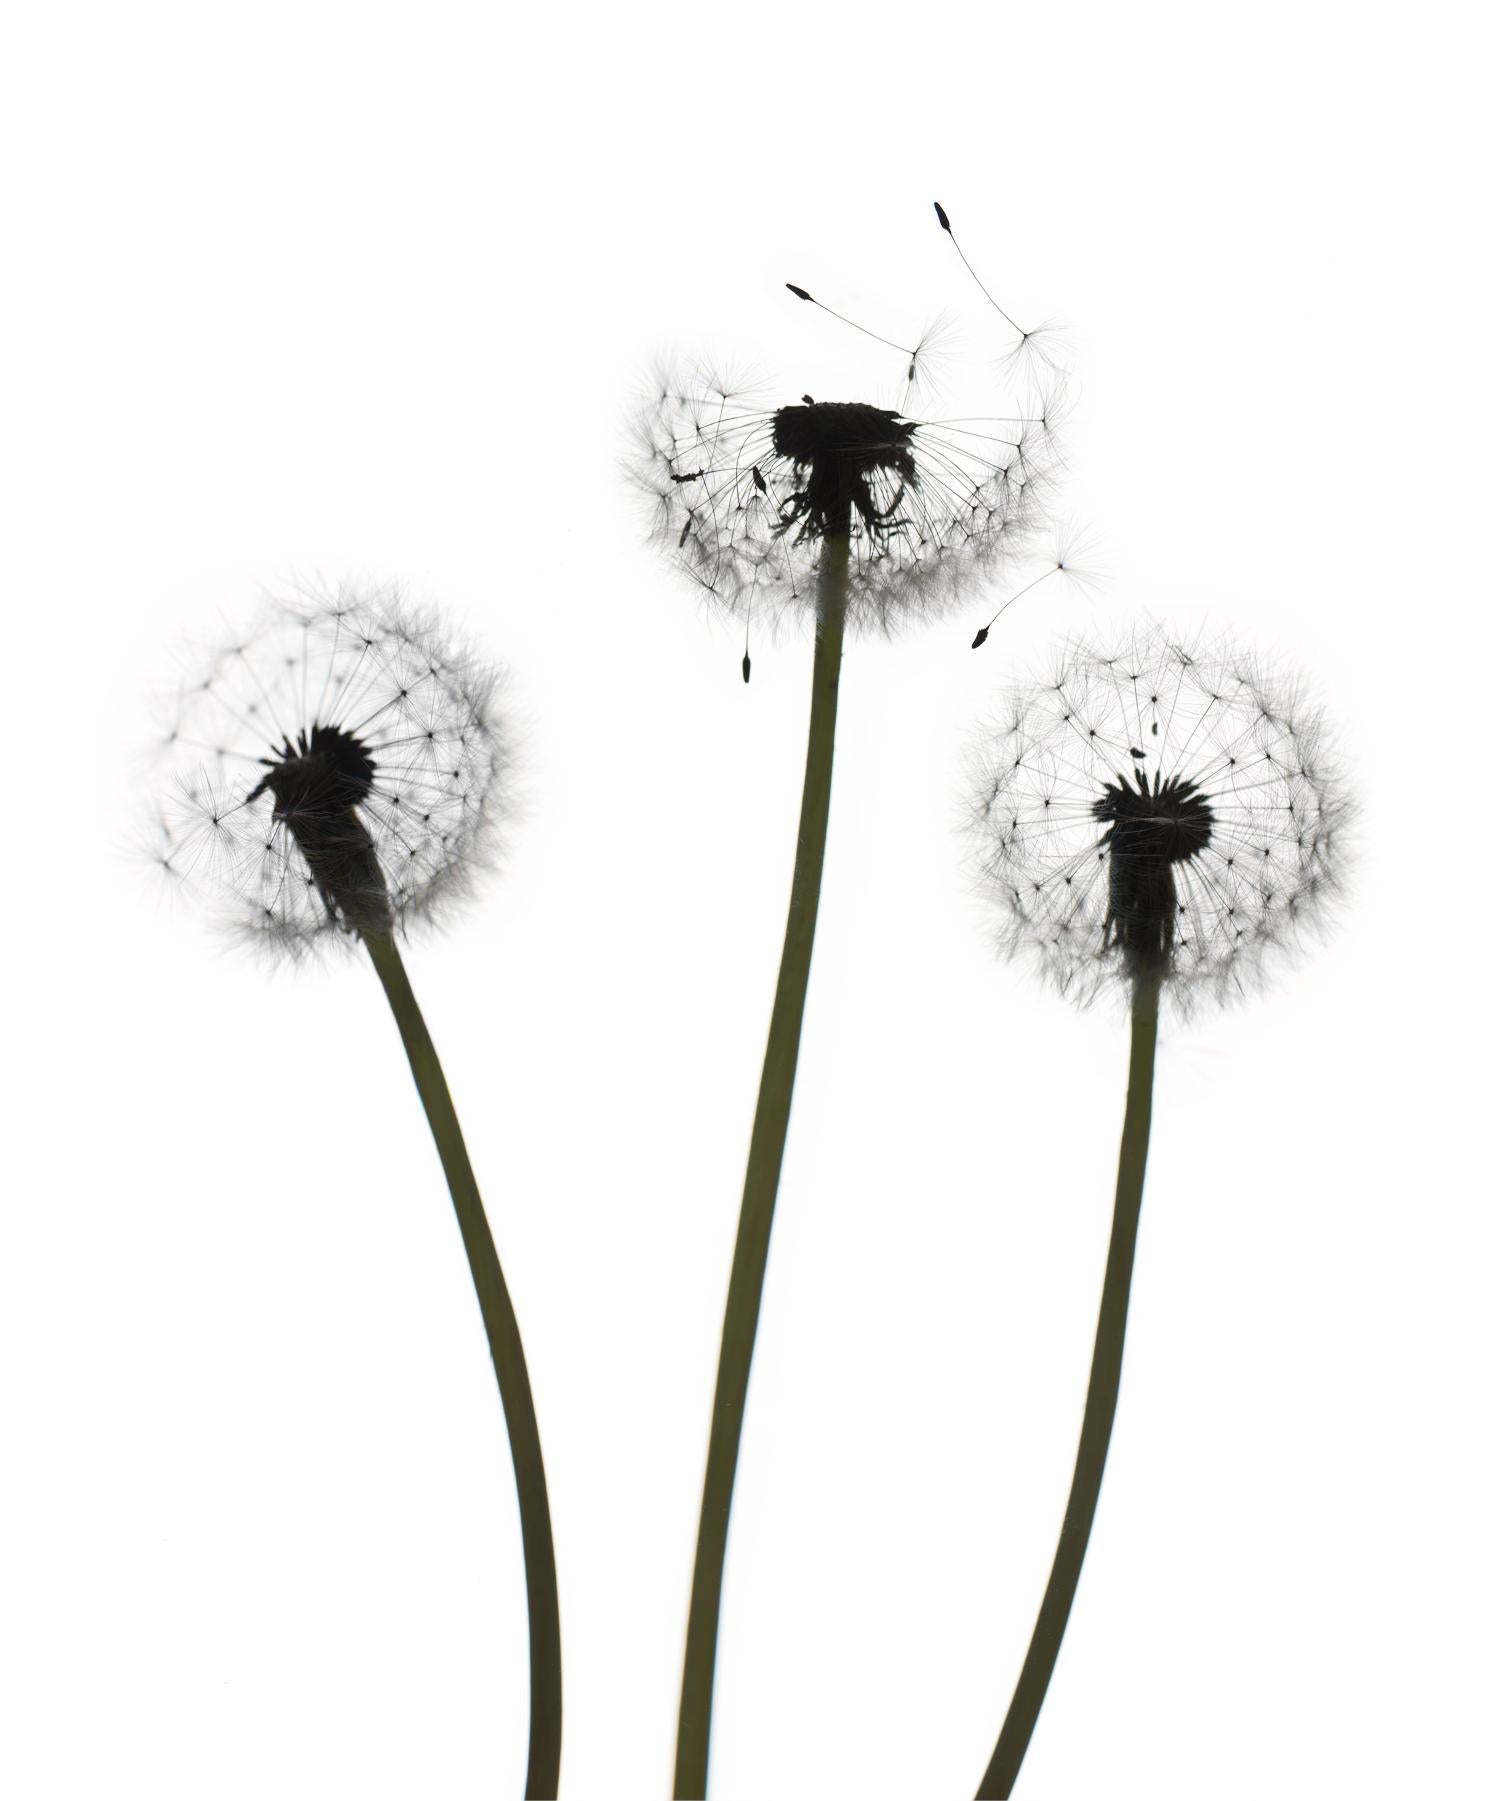 Chad Kleitsch Black and White Photograph - Untitled- Flower 147 (White): Still Life Photograph of Dandelions on White